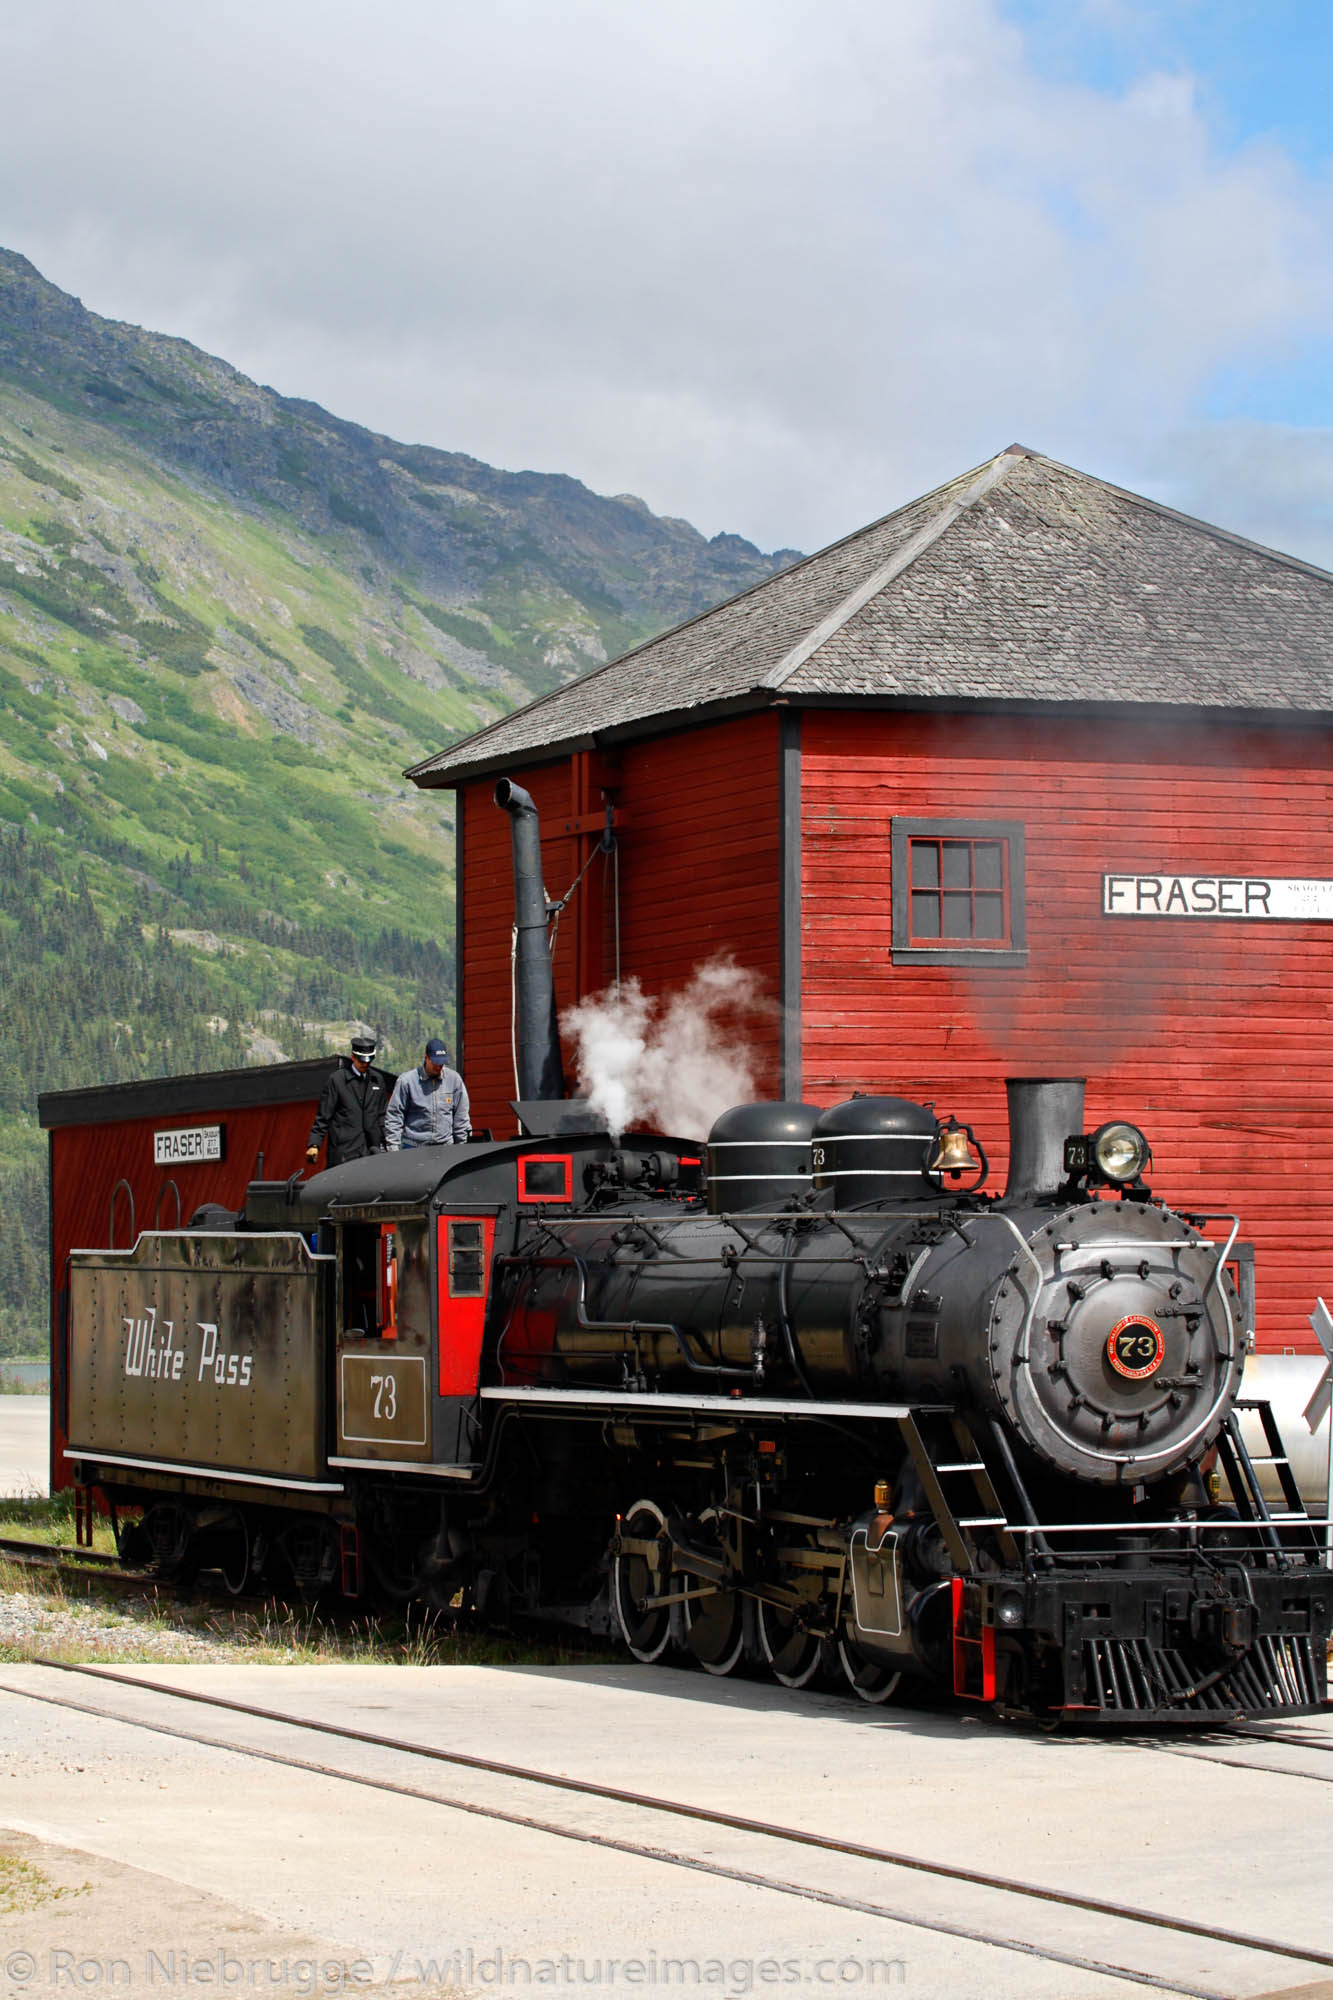 The historic steam engine number 73 gets water in Fraser, British Columbia Canada as part of the White Pass and Yukon Route railroad...